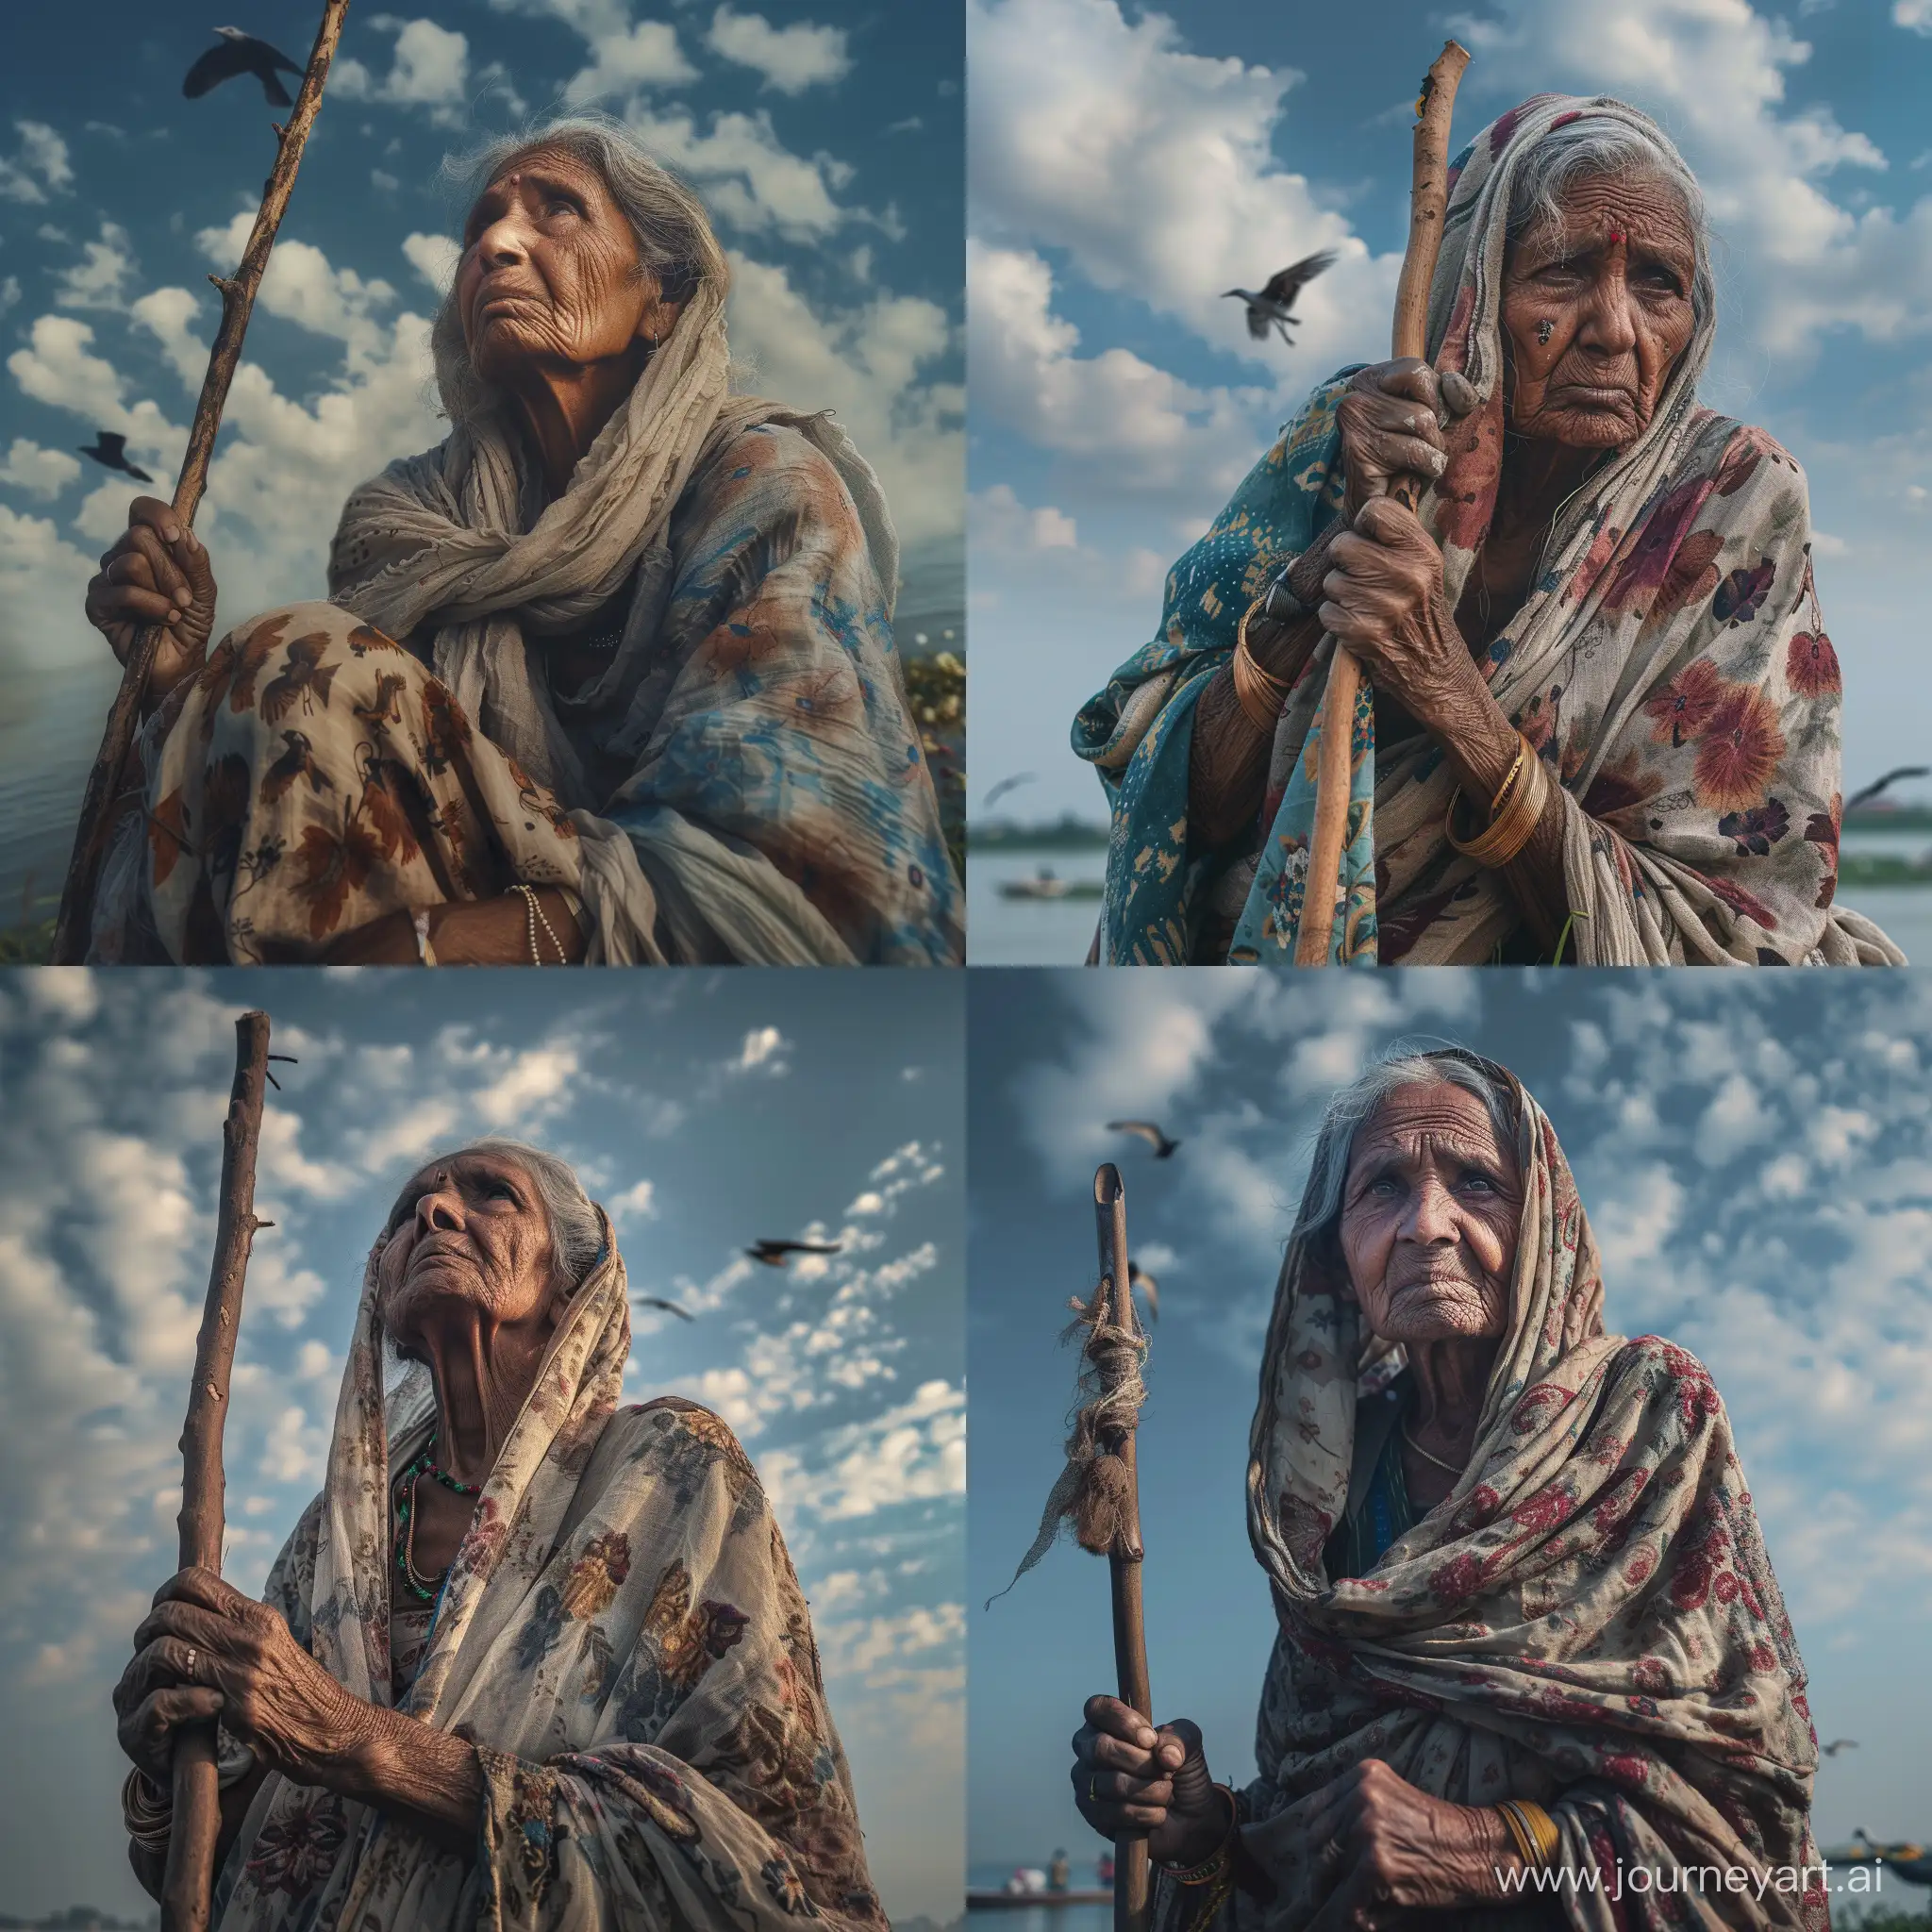      a   80 years old women india in old clothing with a stick   in the back ground  the ganges and some birds  by bleu sk y with clouds soft light and contrast  35mm fuji xt4   fotorealistisch total body low angle